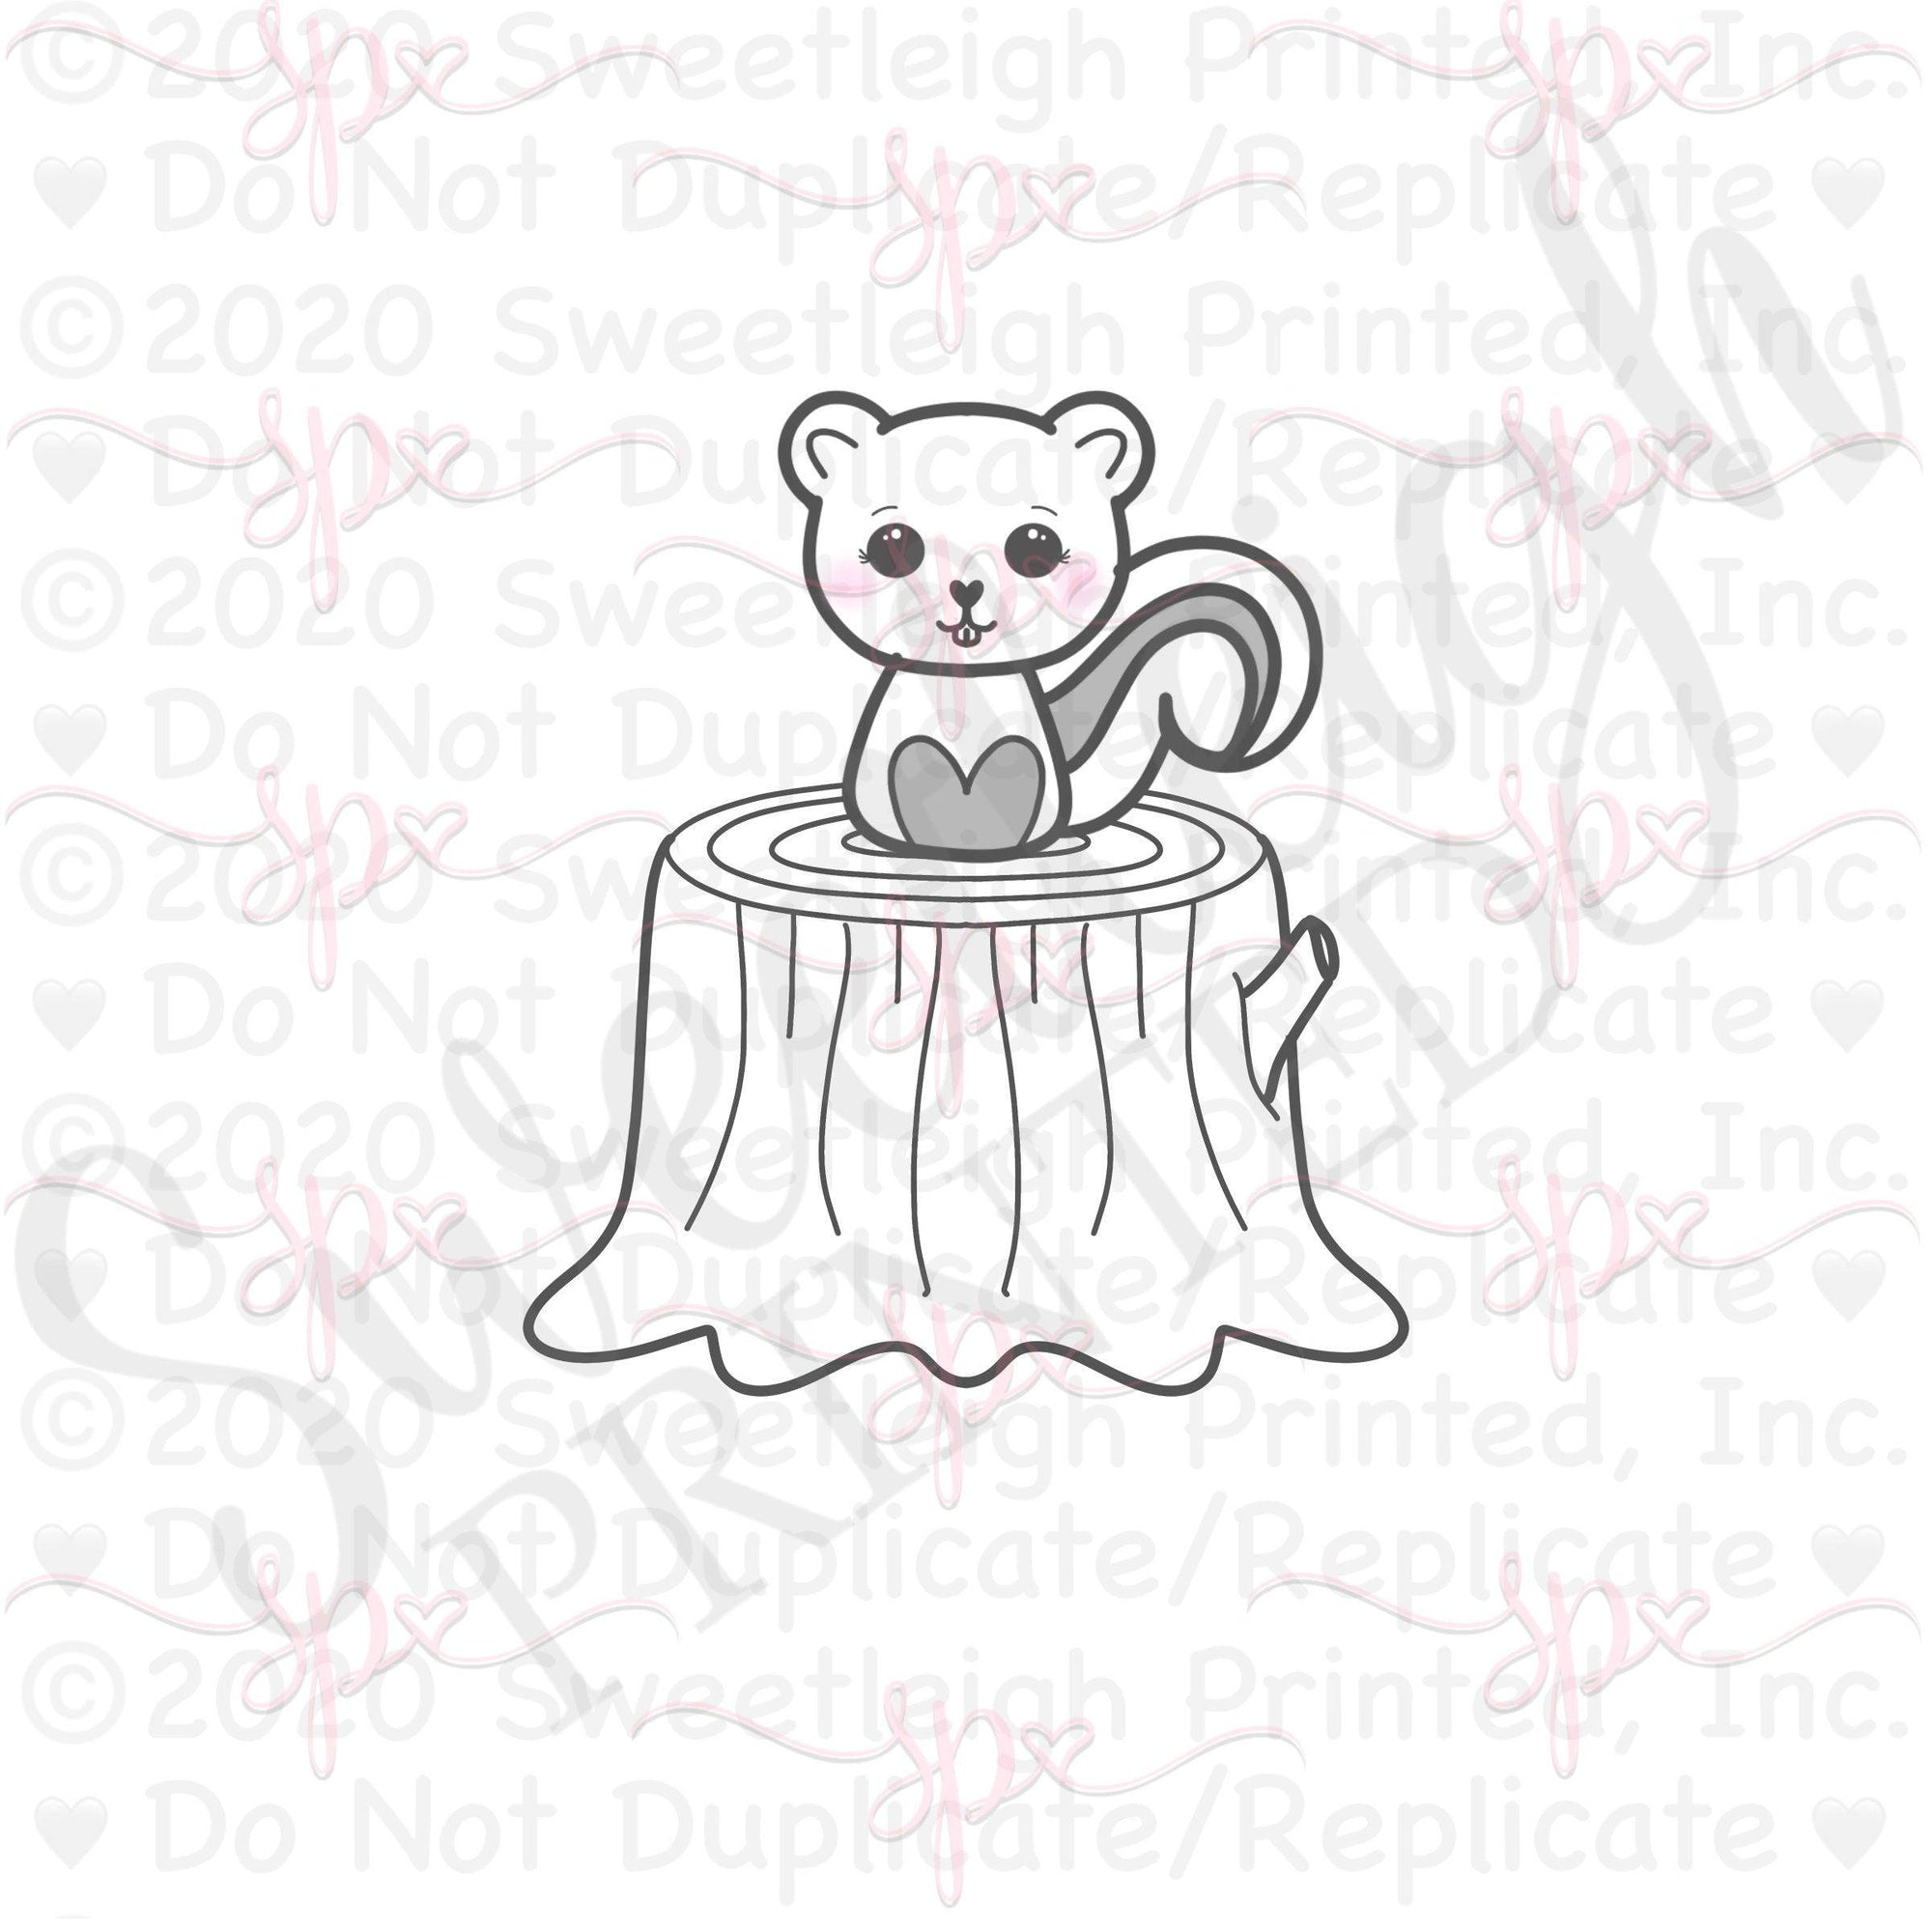 Squirrel on Stump Cookie Cutter - Sweetleigh 